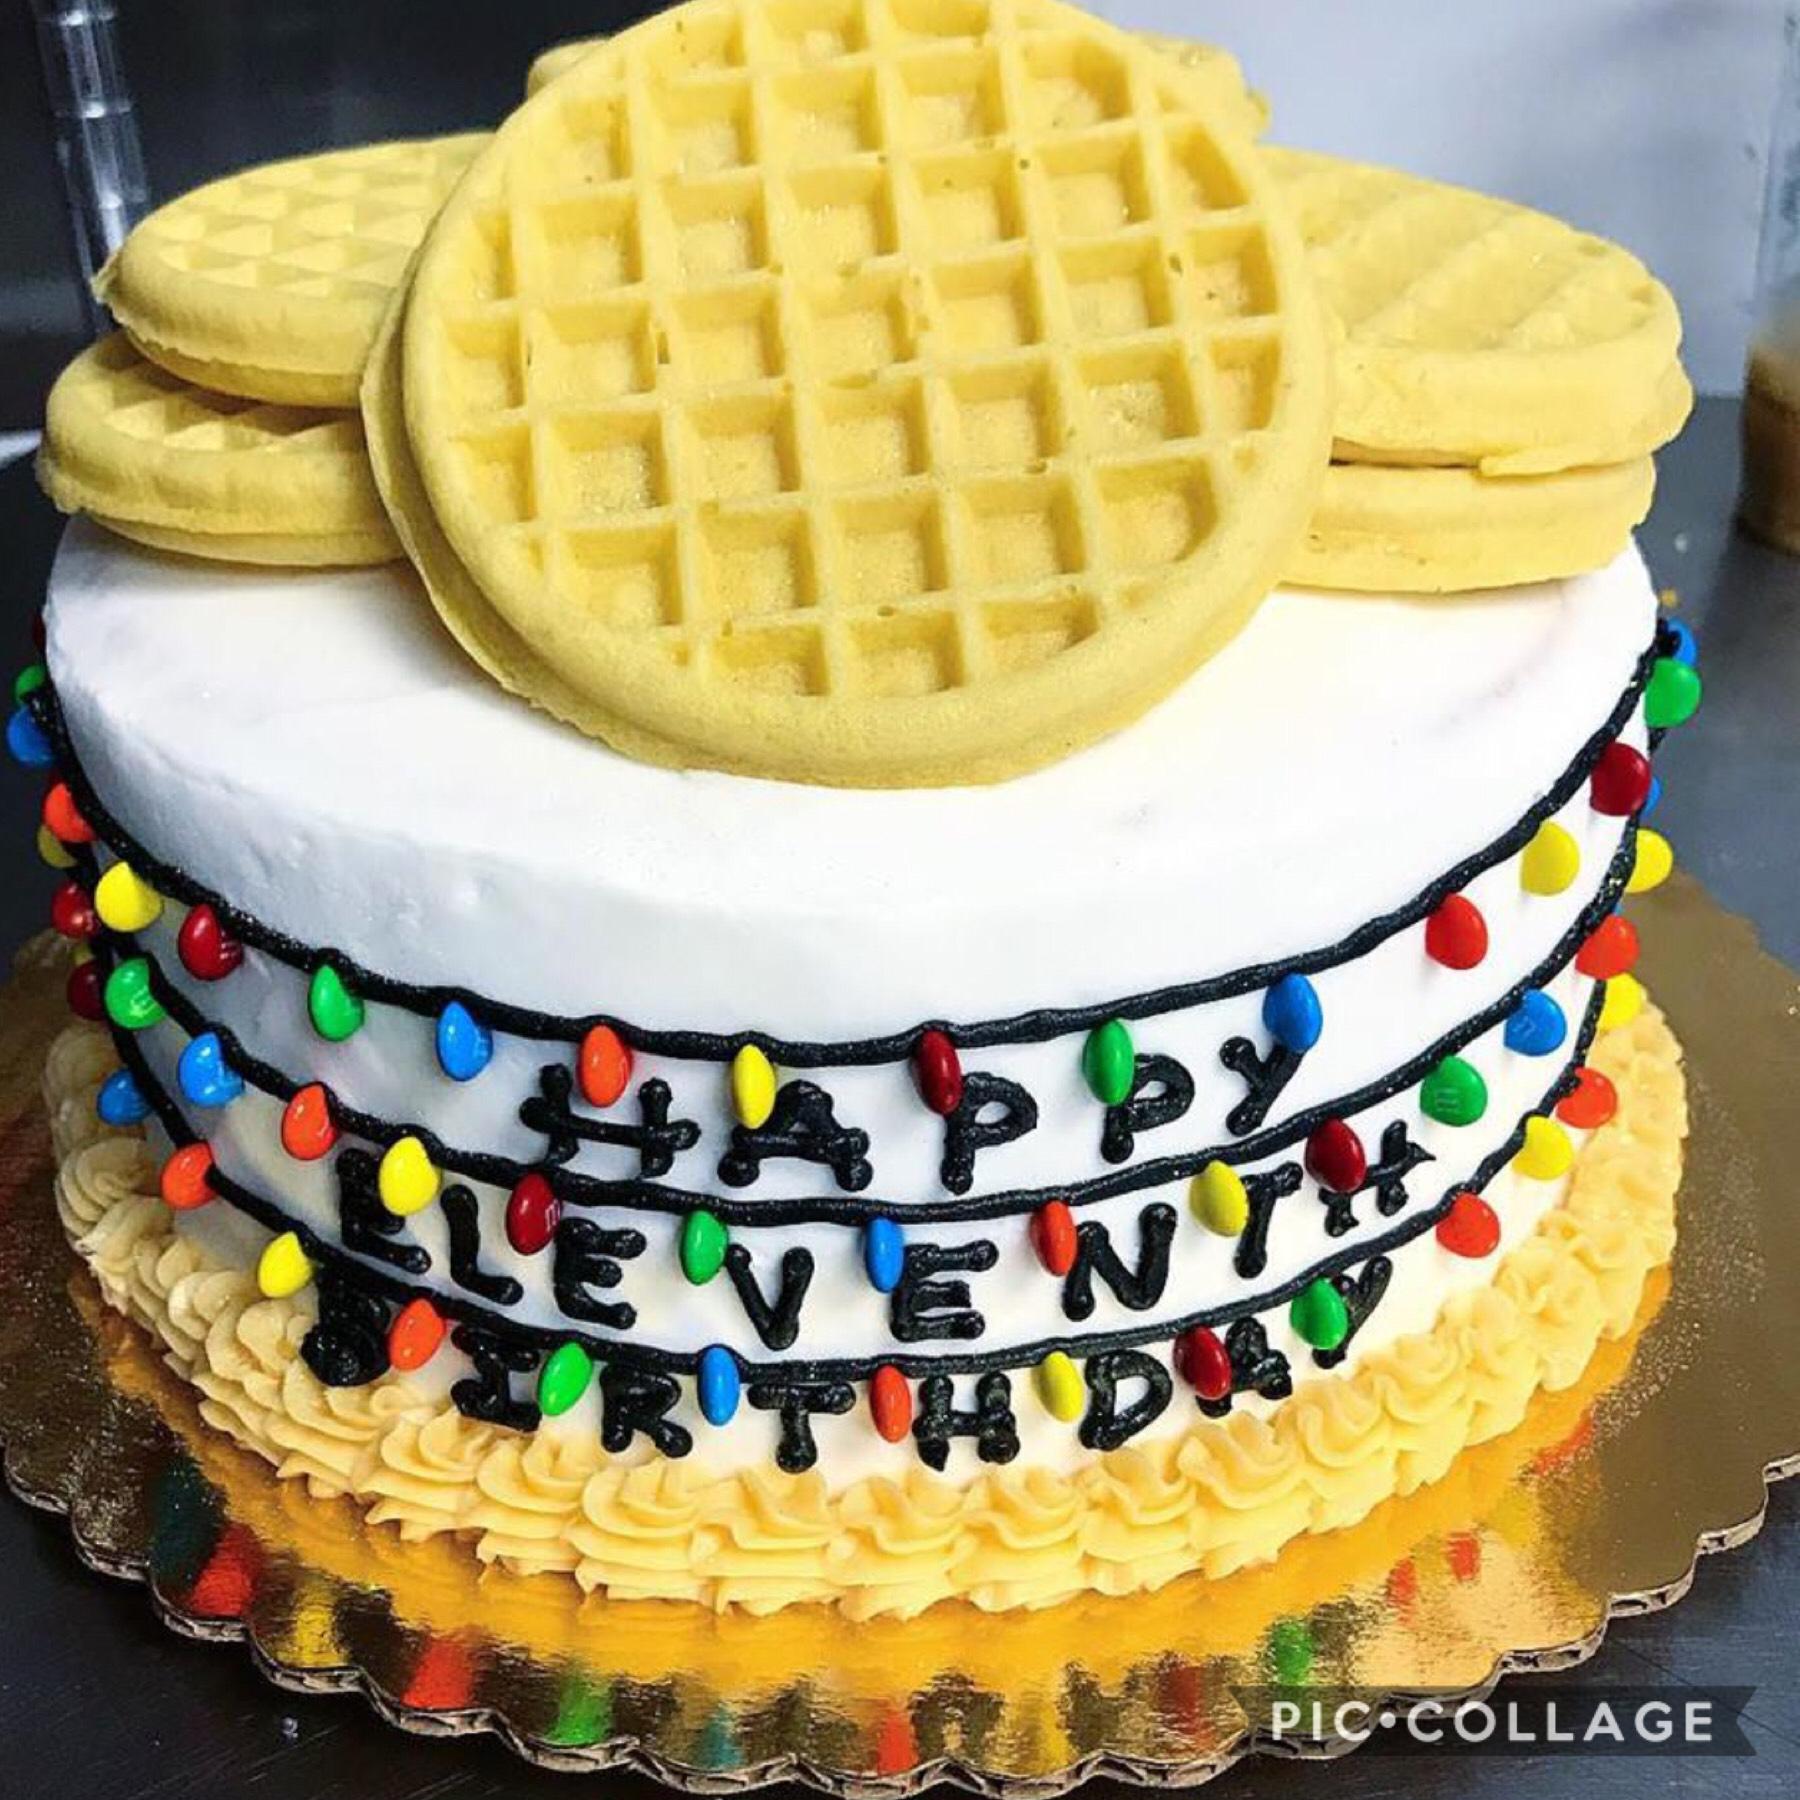 I found this eleventh cake online and I just turned eleven!it resembles m sooo much! I love stranger things 💖 #should I stay or should eggo?